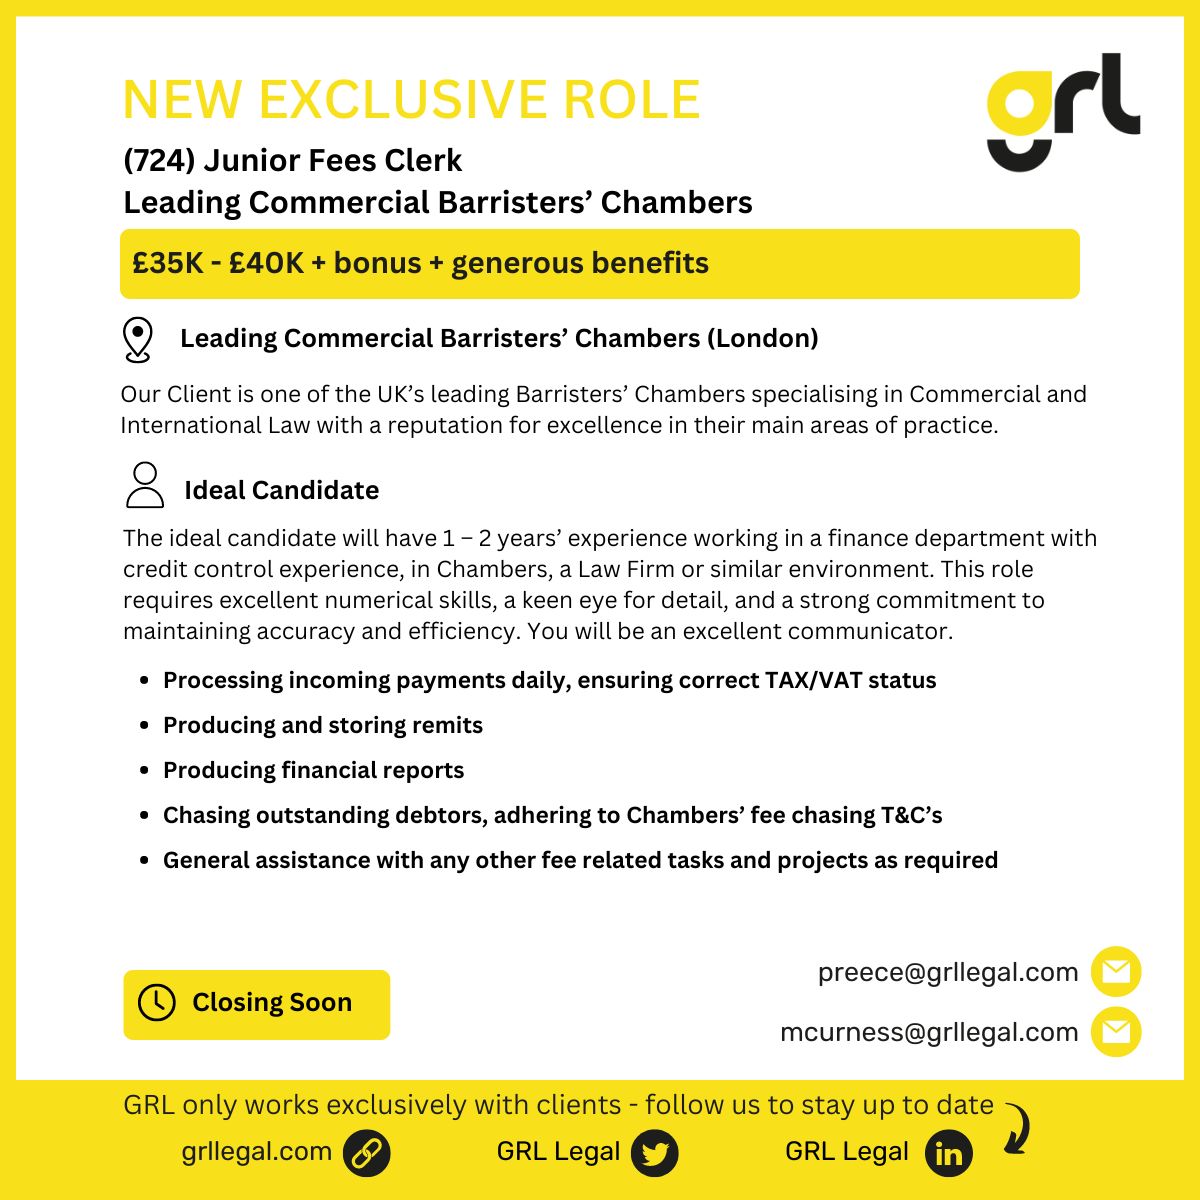 (724) Junior Fees Clerk

Partnered exclusively with a Leading Barristers' Chambers based in London, we are seeking a Junior Fees Clerk to join their forward thinking and friendly team. 

Send your CV ⬇️ 
📩 recruitment@grllegal.com 

#legalrecruitment